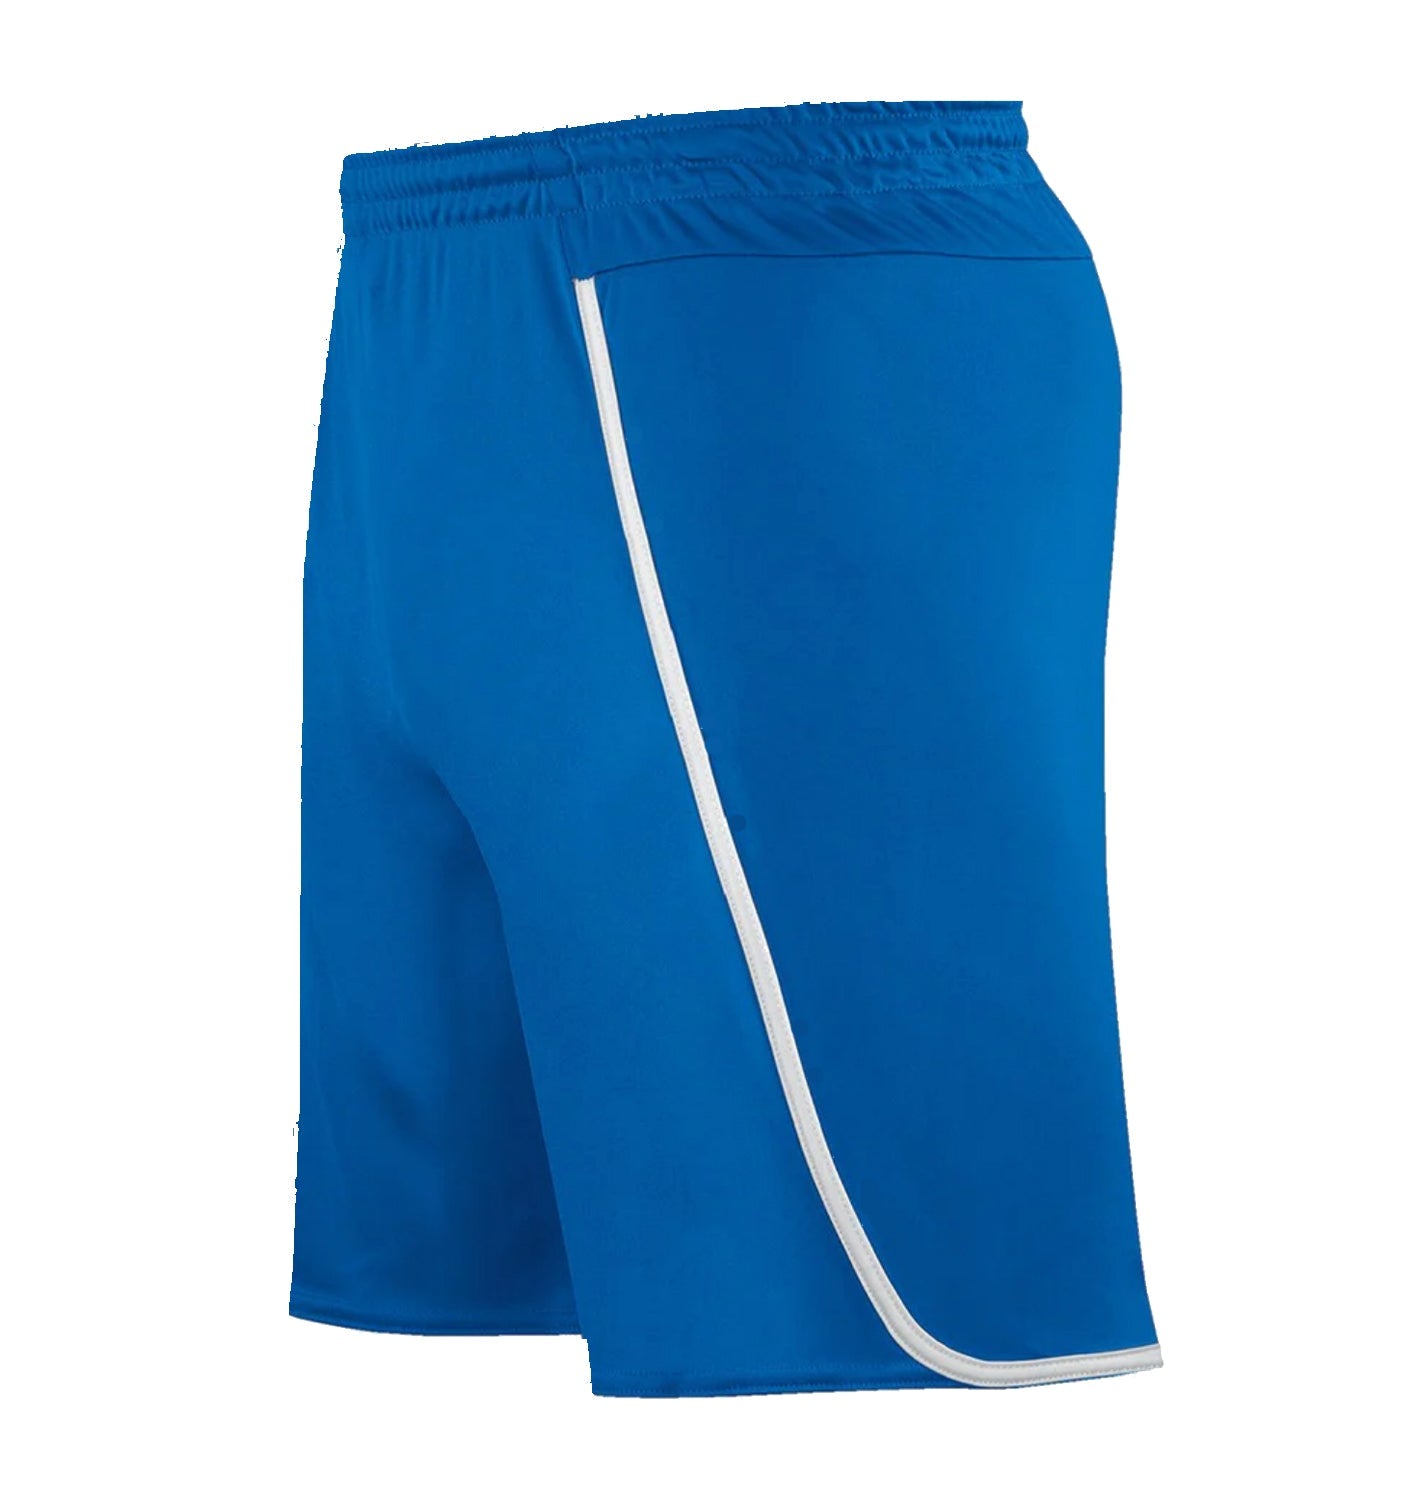 Pacific Soccer Shorts - Youth - Youth Sports Products